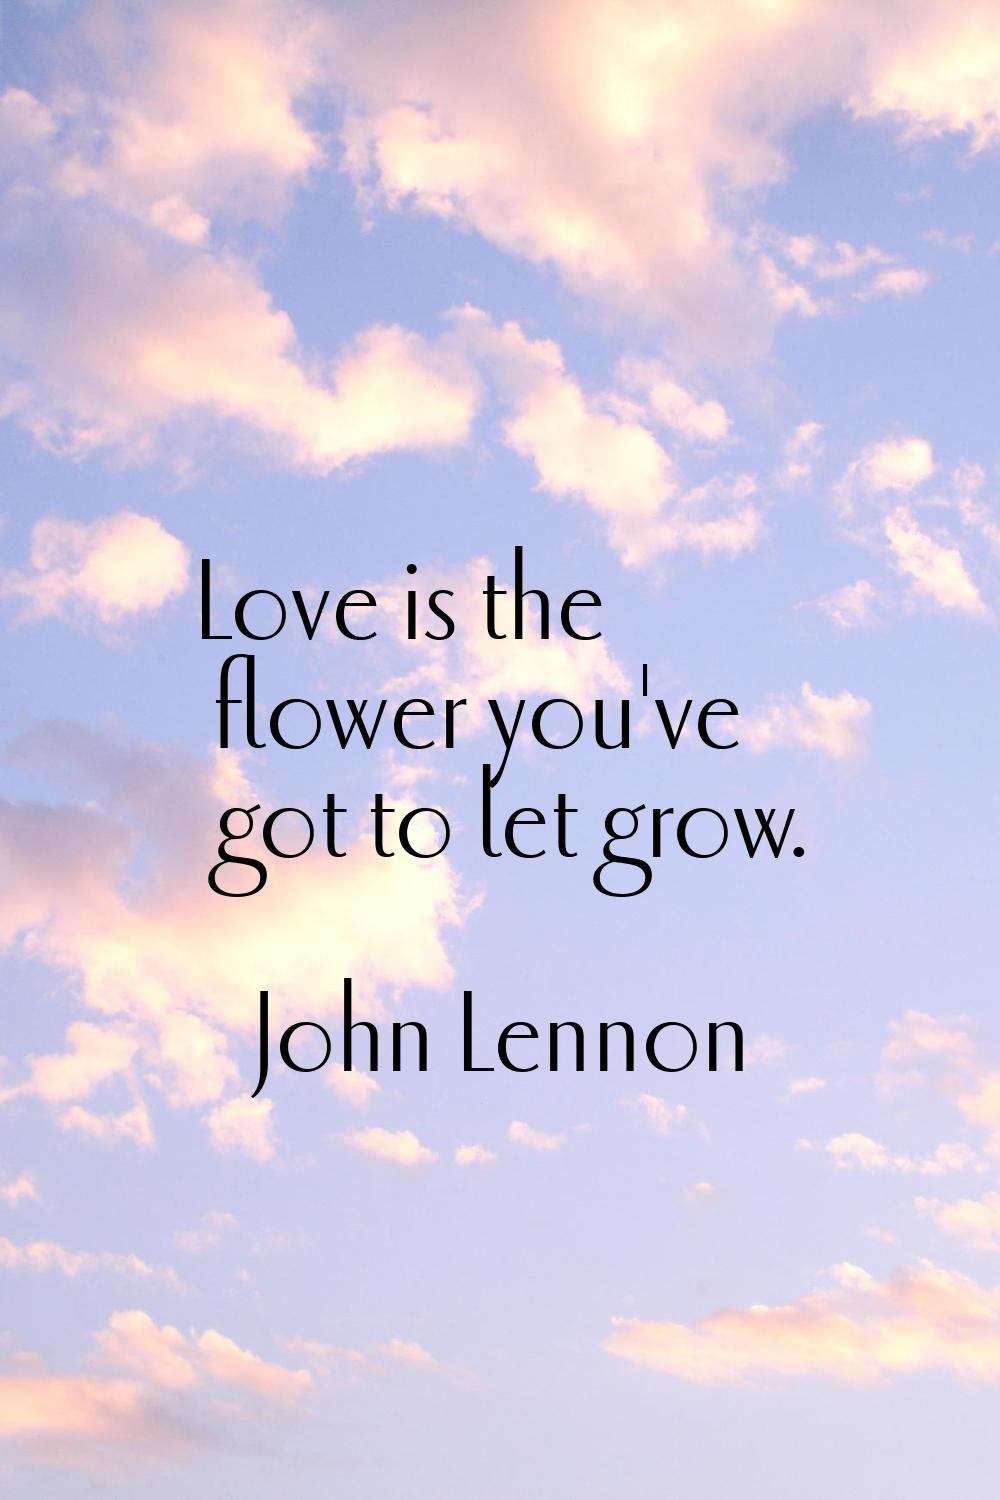 Love is the flower you've got to let grow.